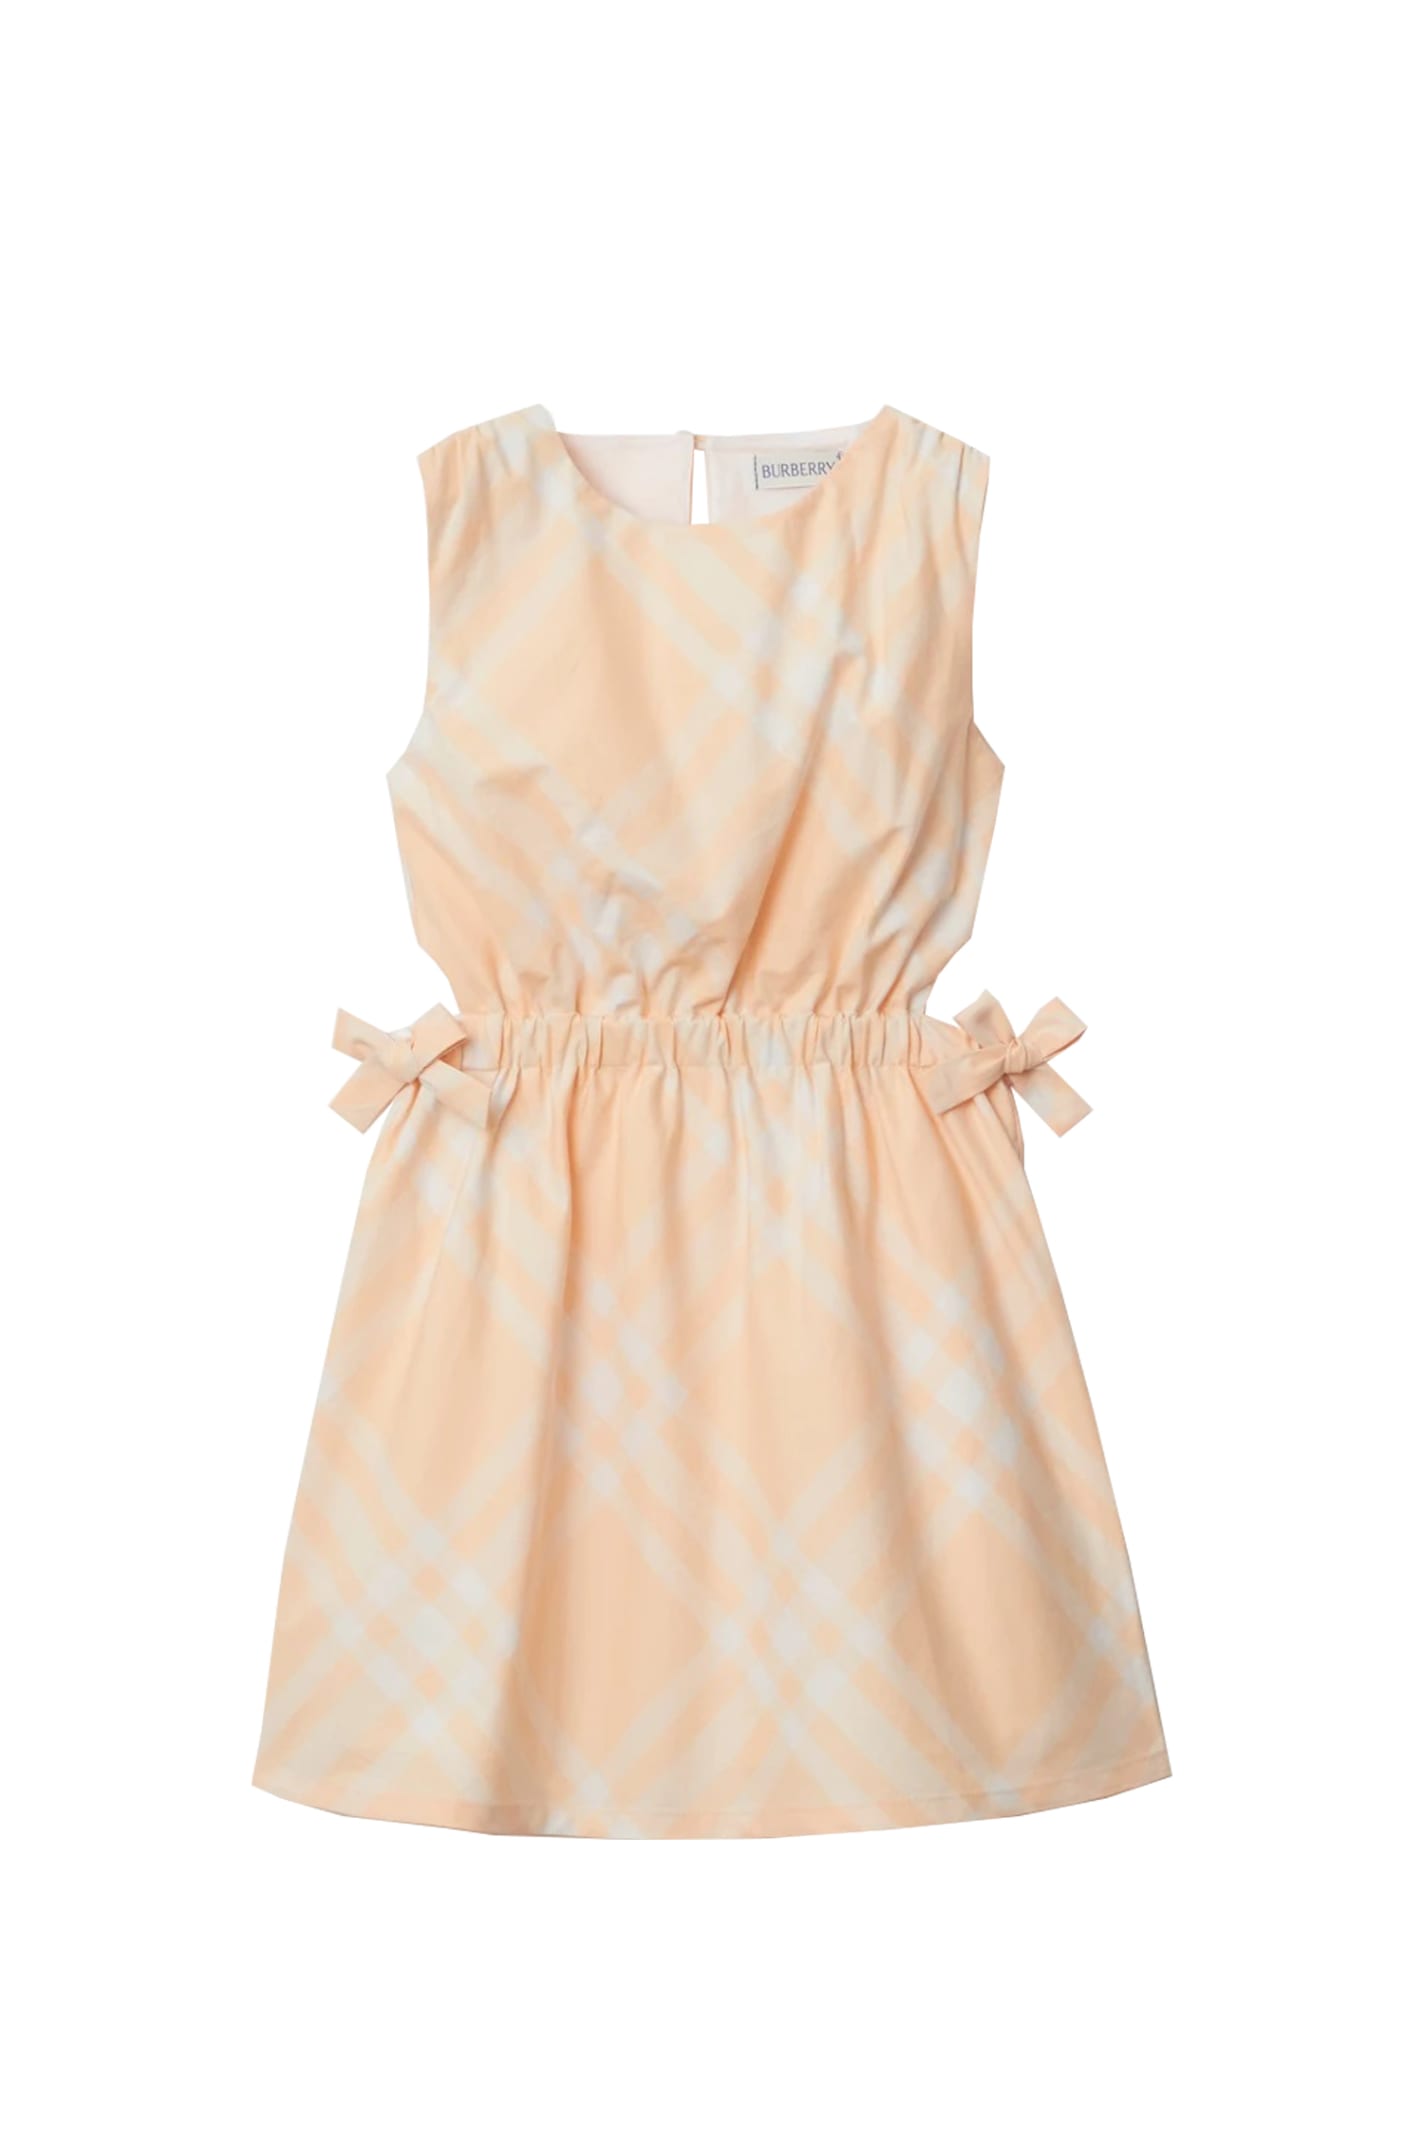 Shop Burberry Dress In Rose